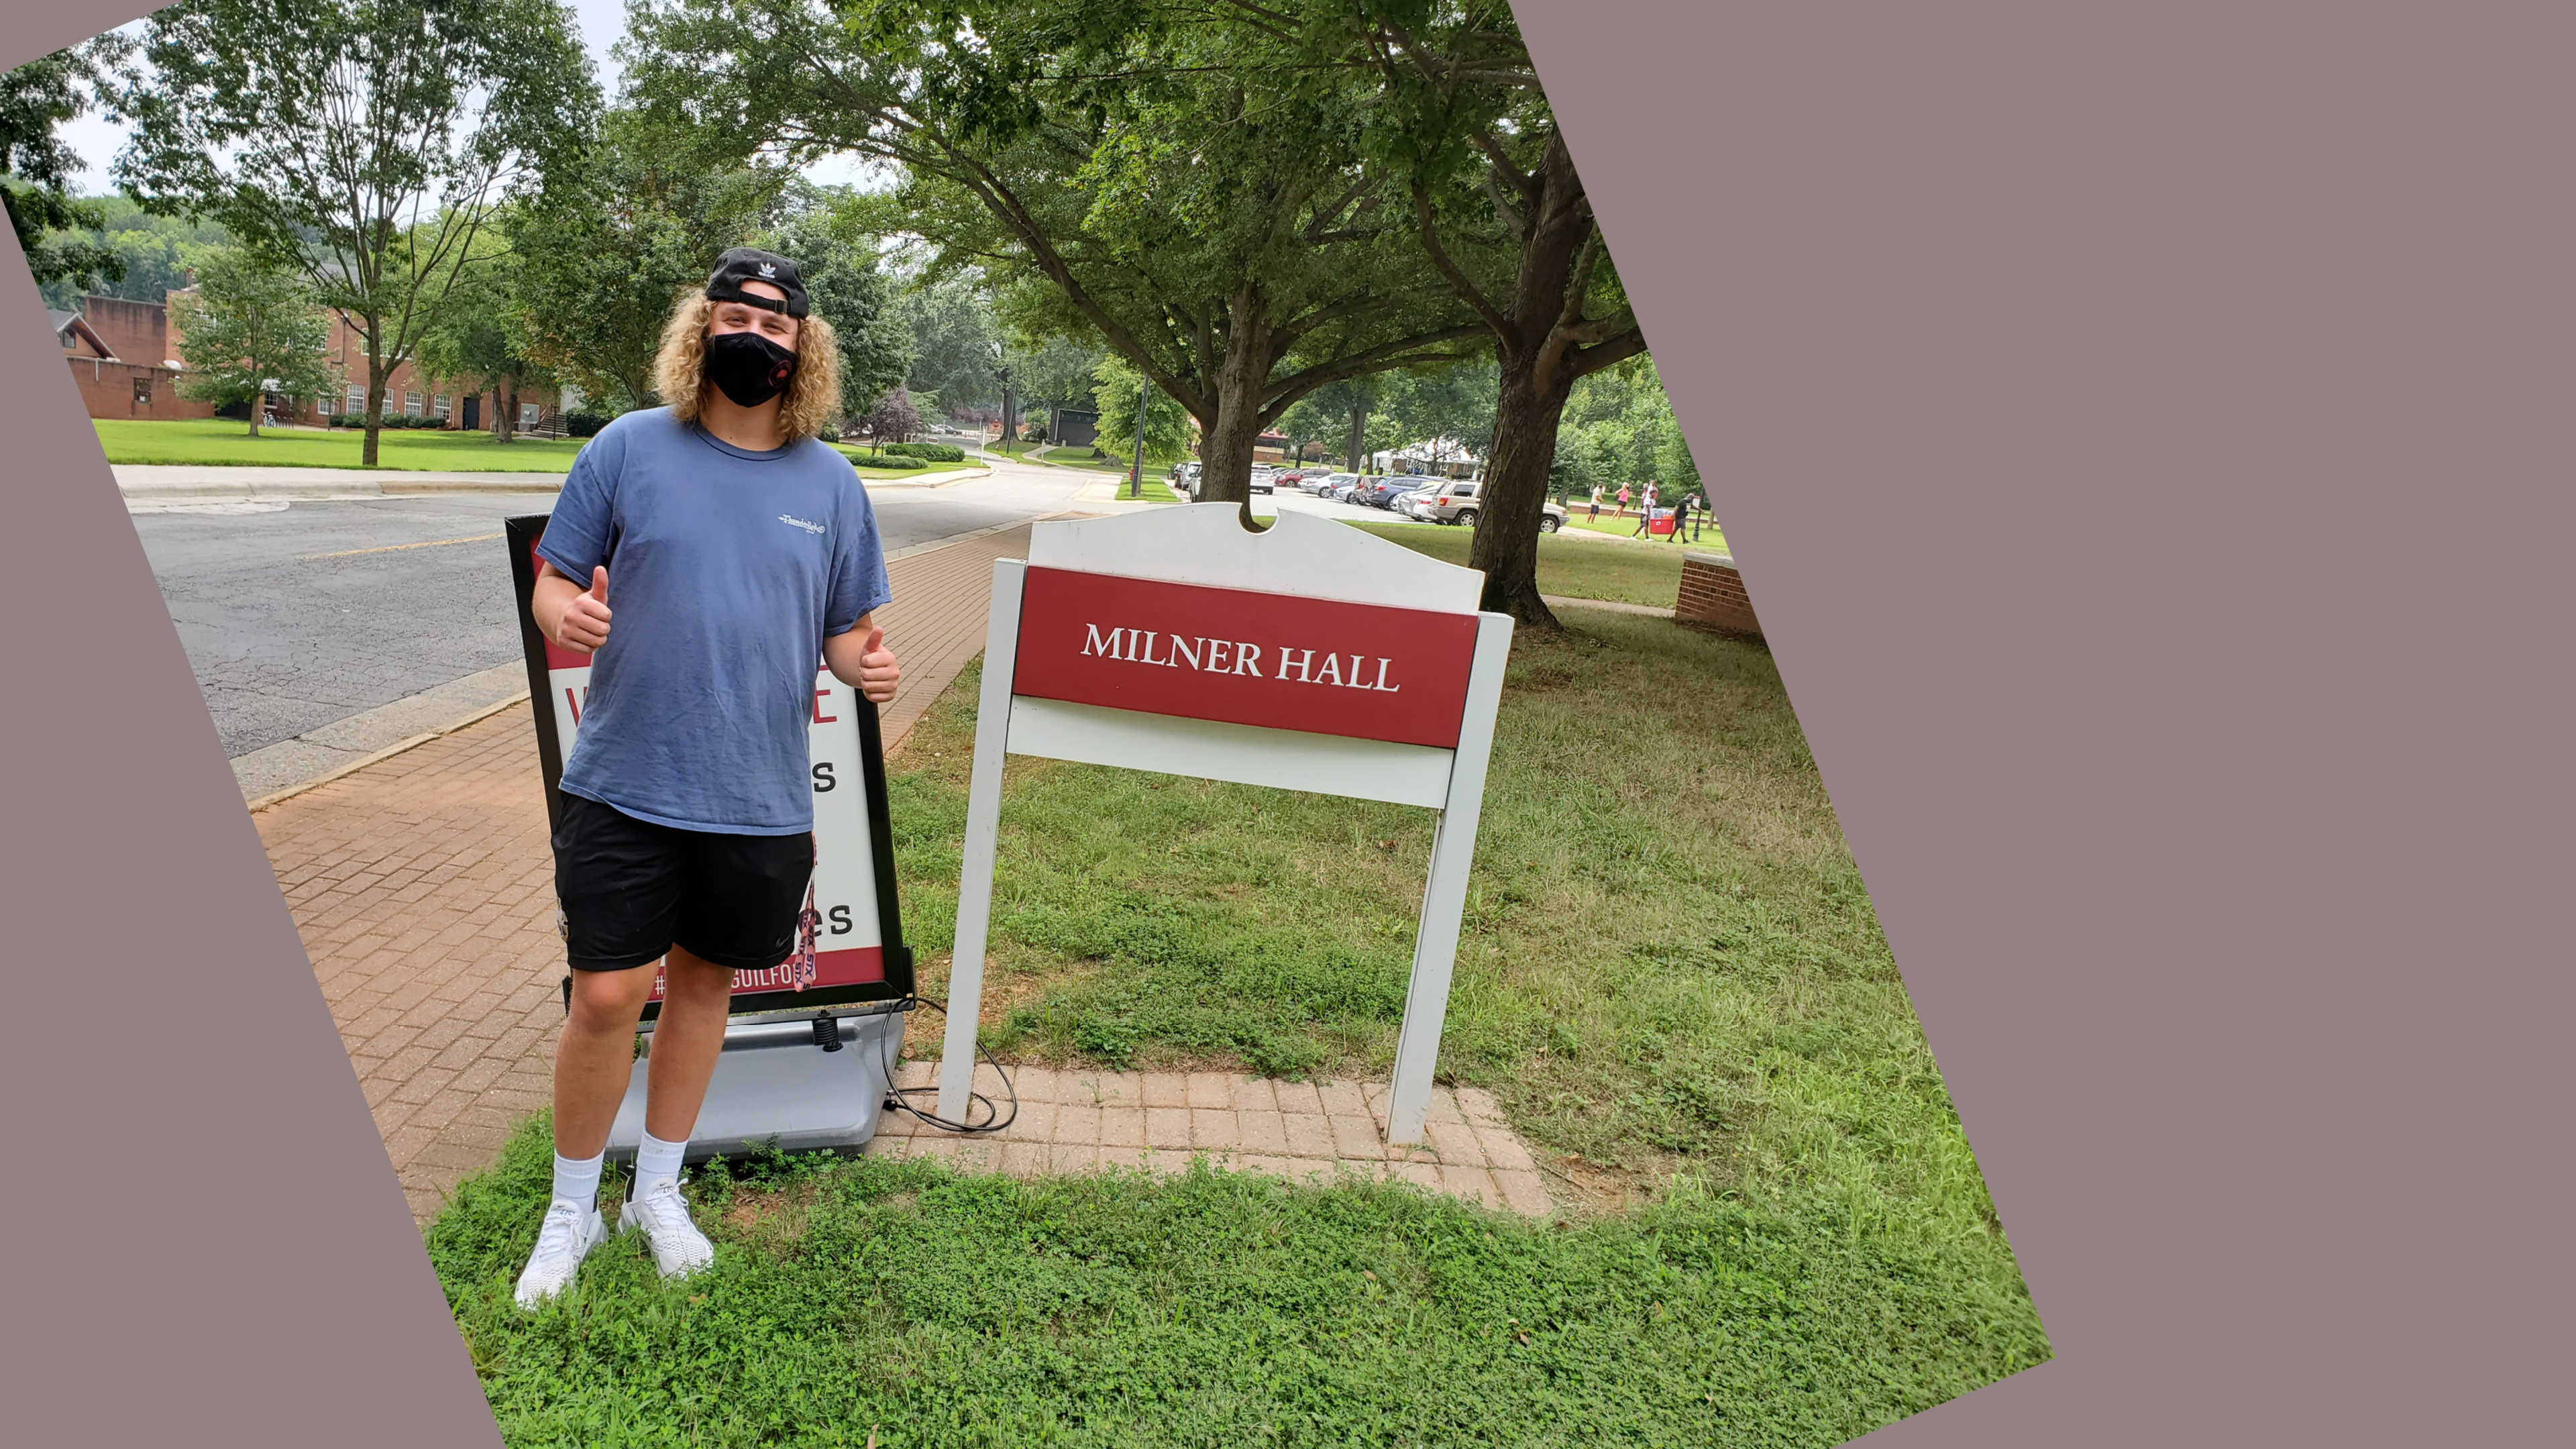 An excited student poses for a photo outside of Milner Hall.